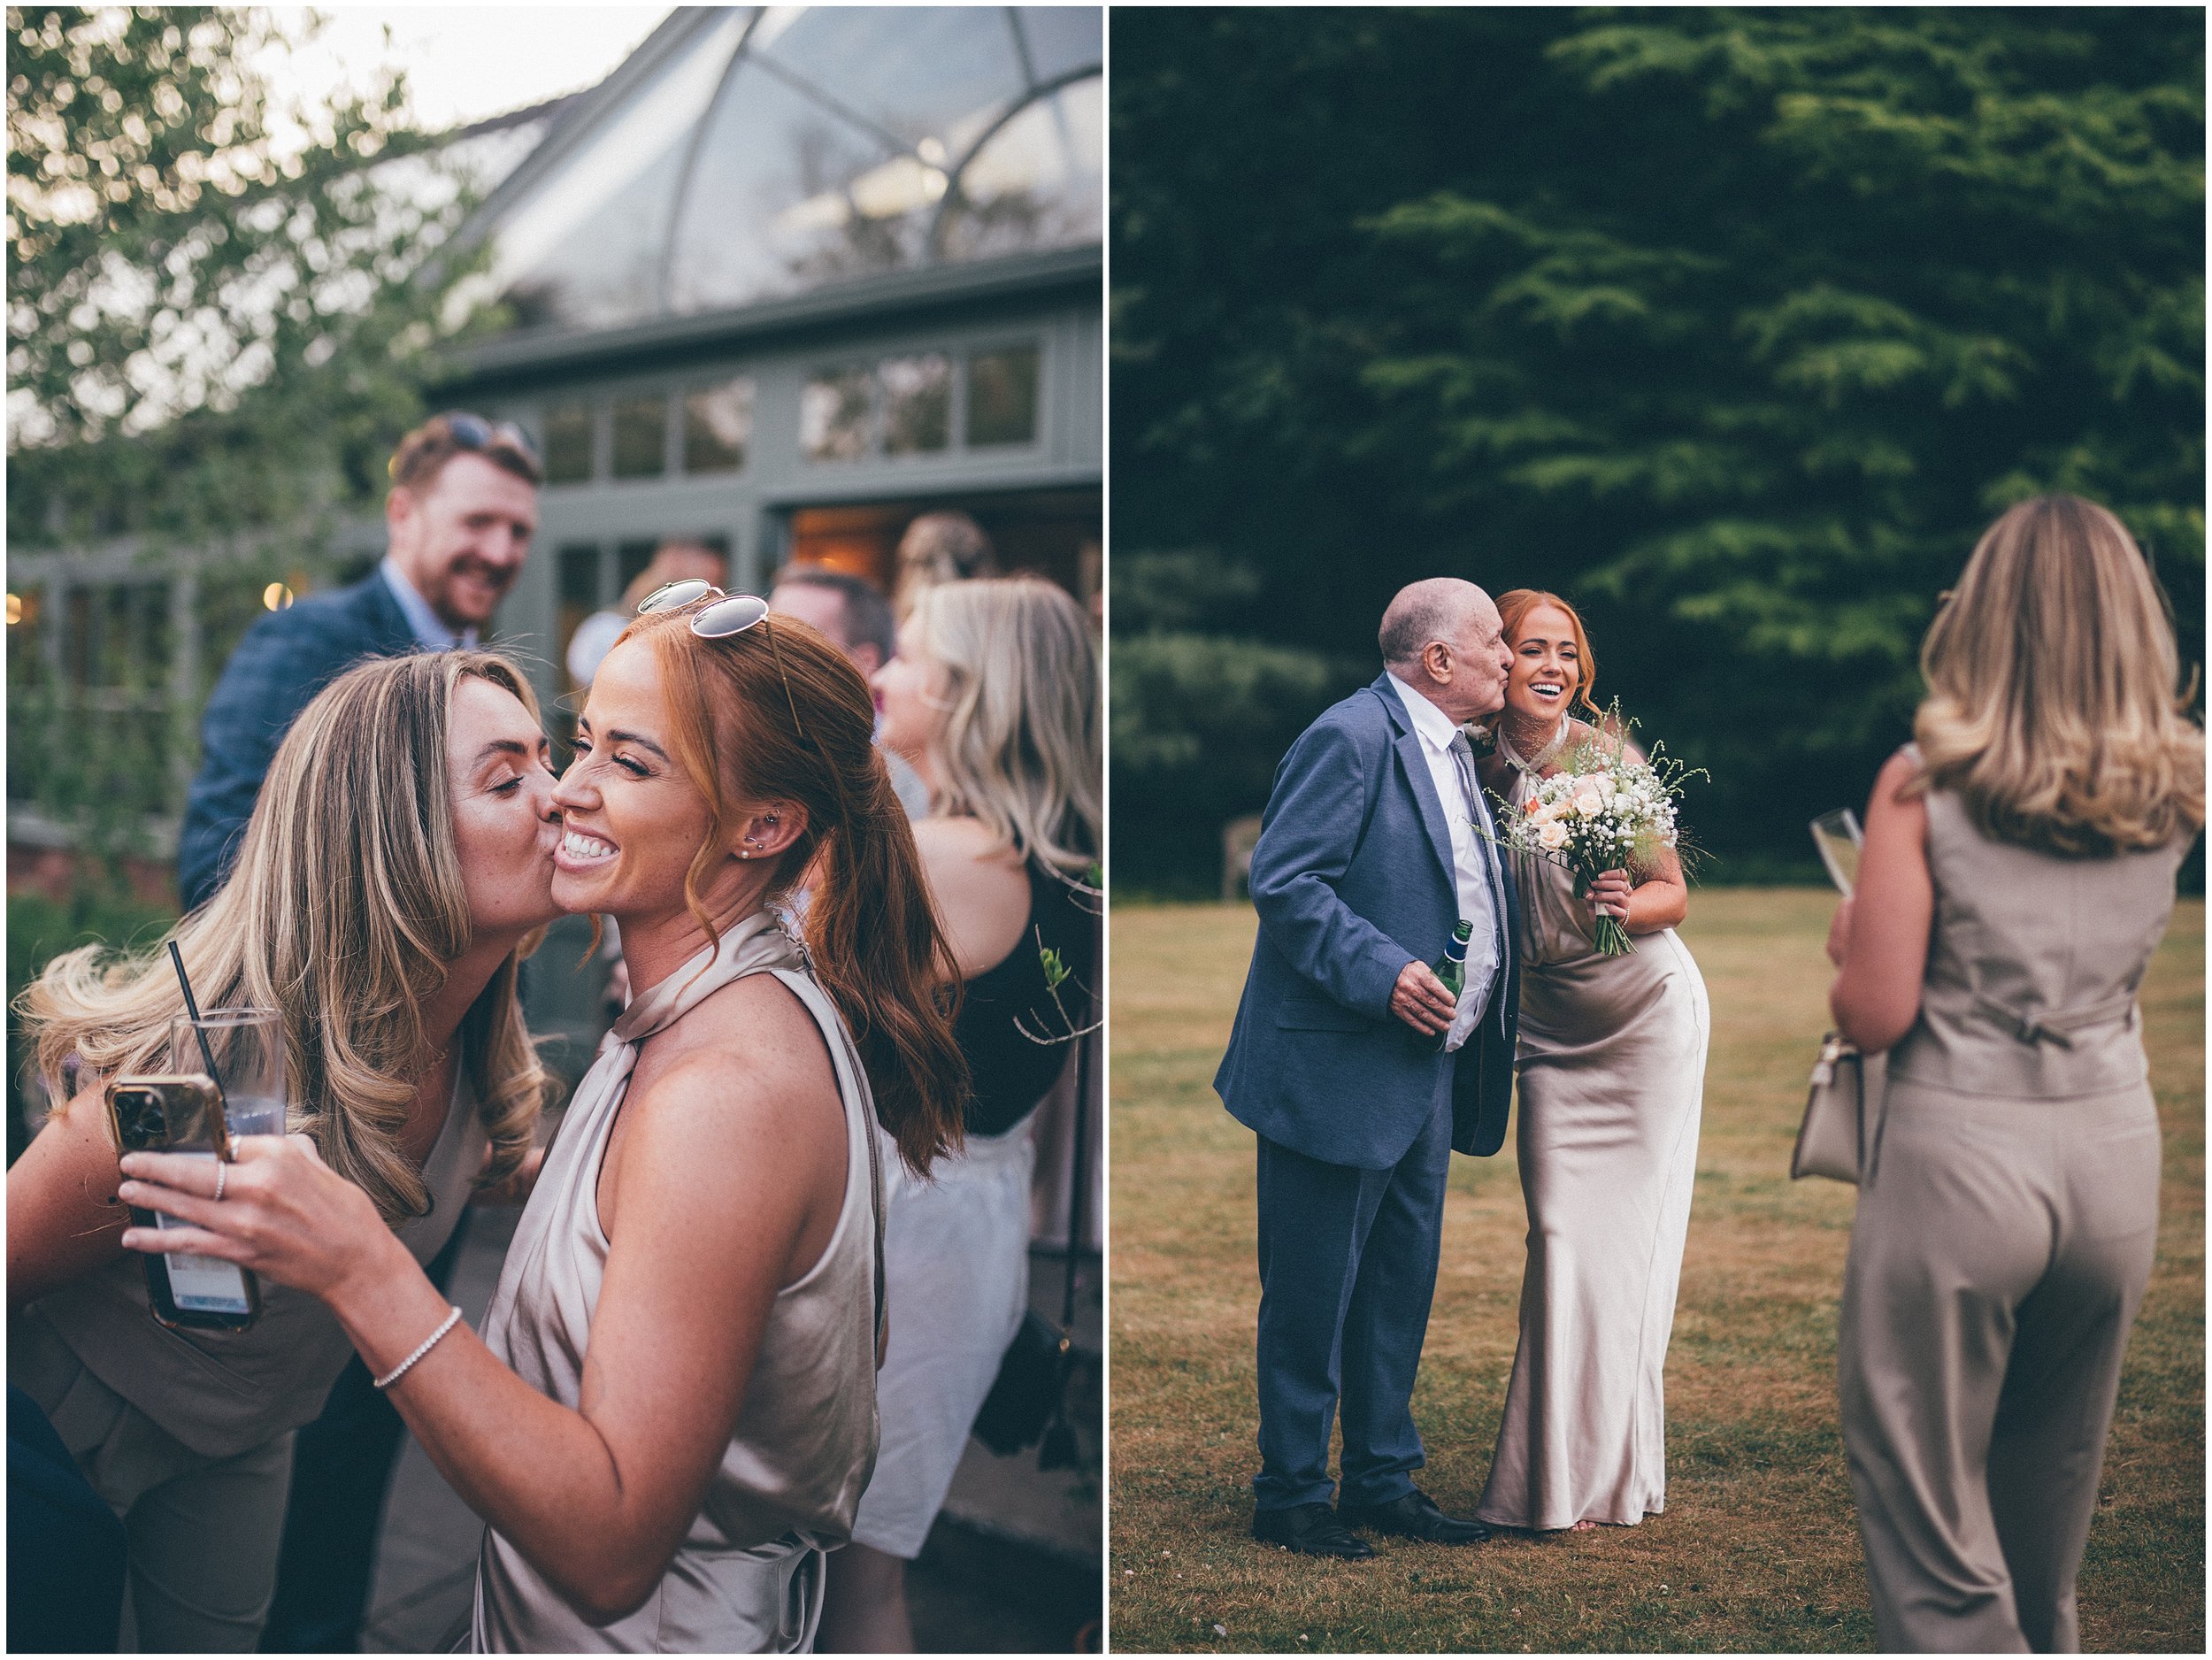 Wedding guests enjoy evening reception at Abbeywood Estate in Delamere, Cheshire.